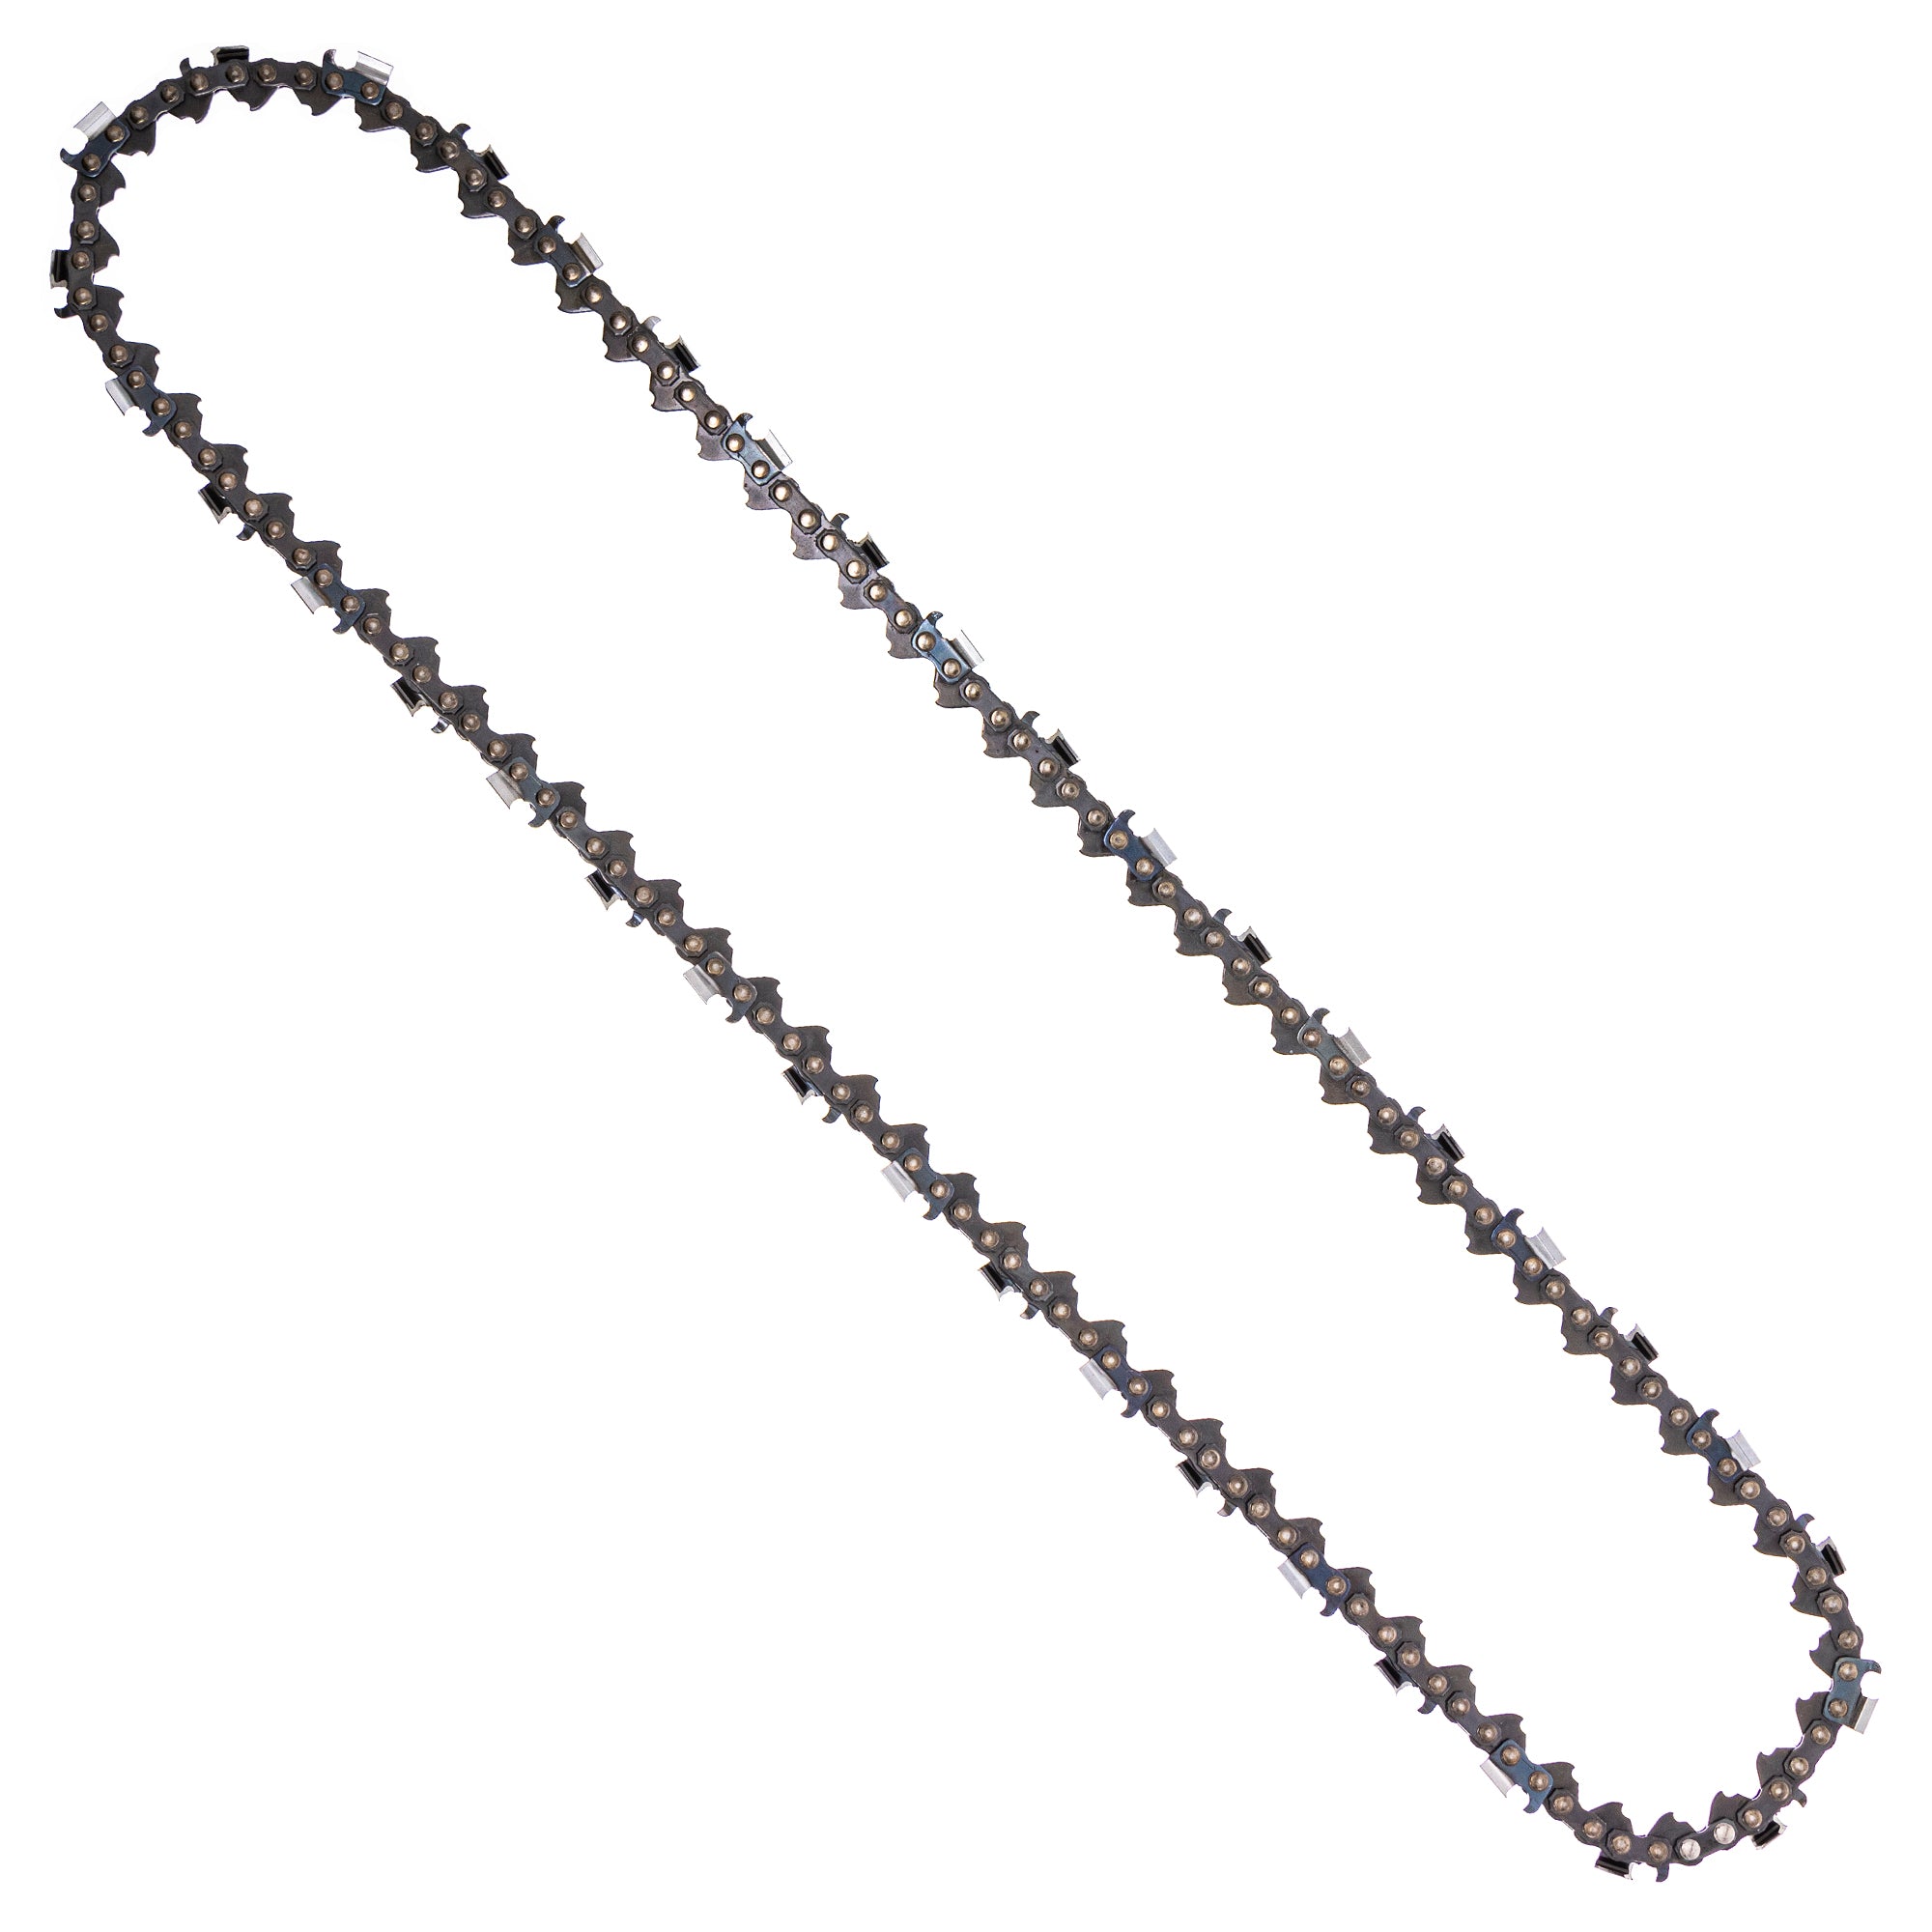 8TEN 810-CCC2230H Chain 5-Pack for zOTHER Stens Oregon Husqvarna